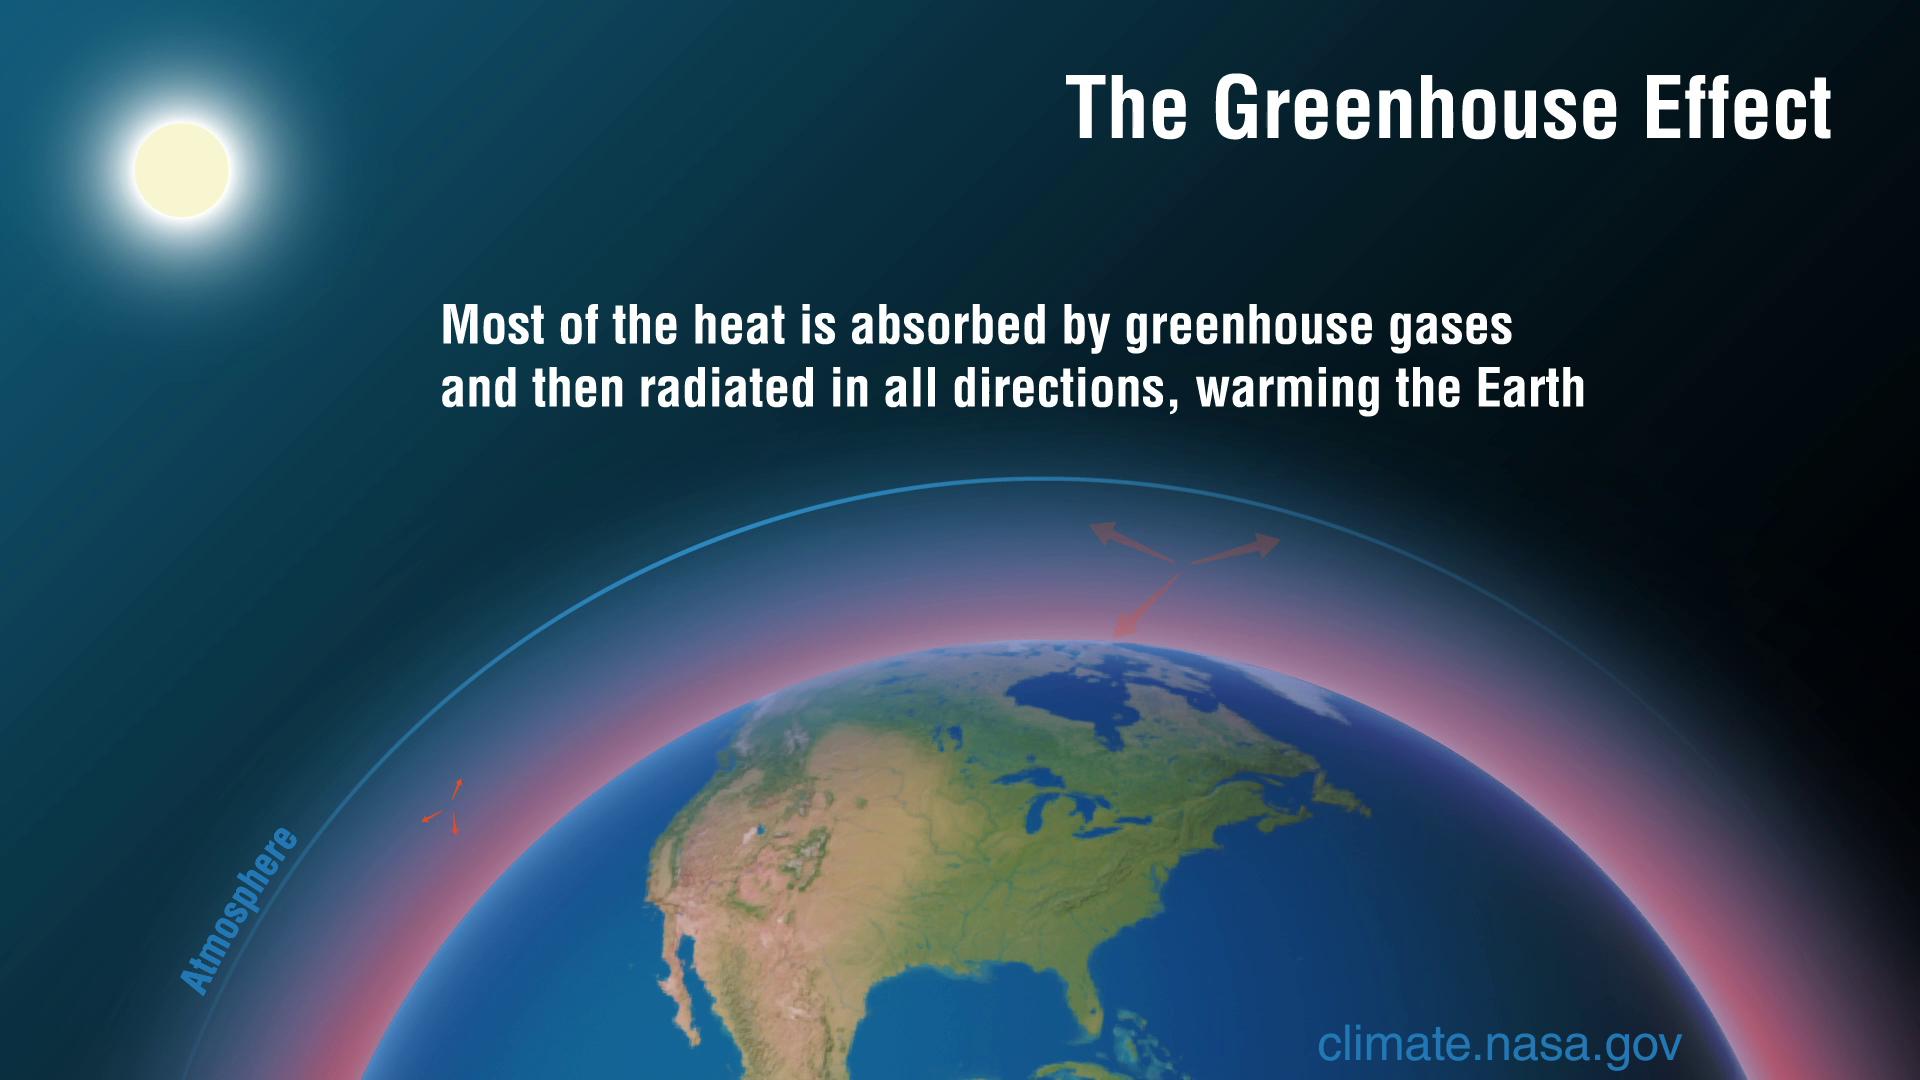 global warming and greenhouse effect essay